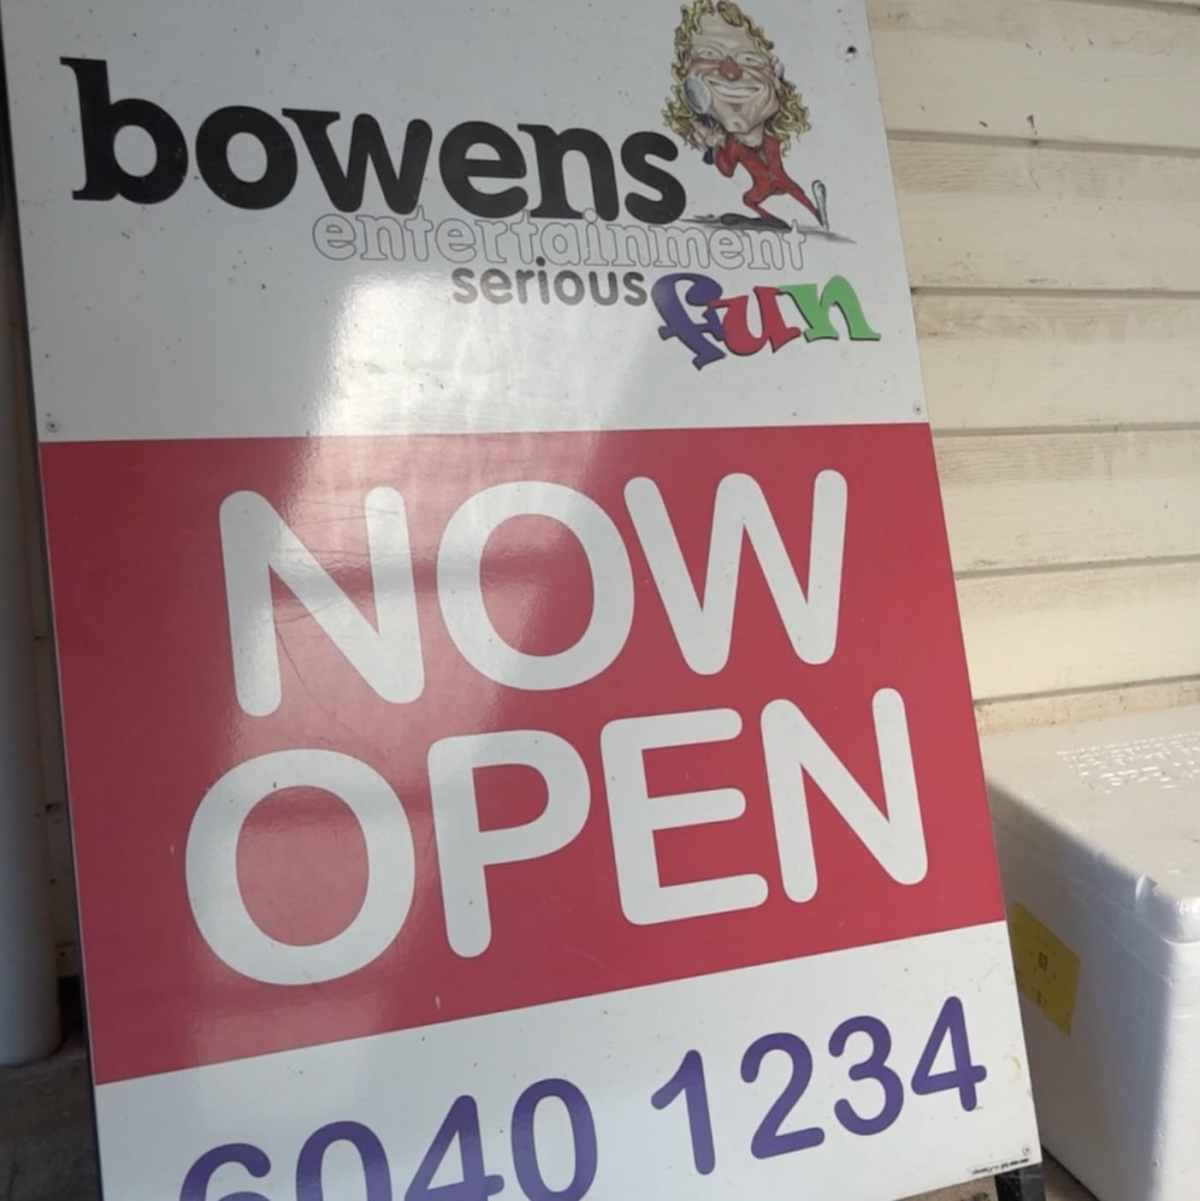 Sign reading 'Bowens Serious Fun: Now Open'